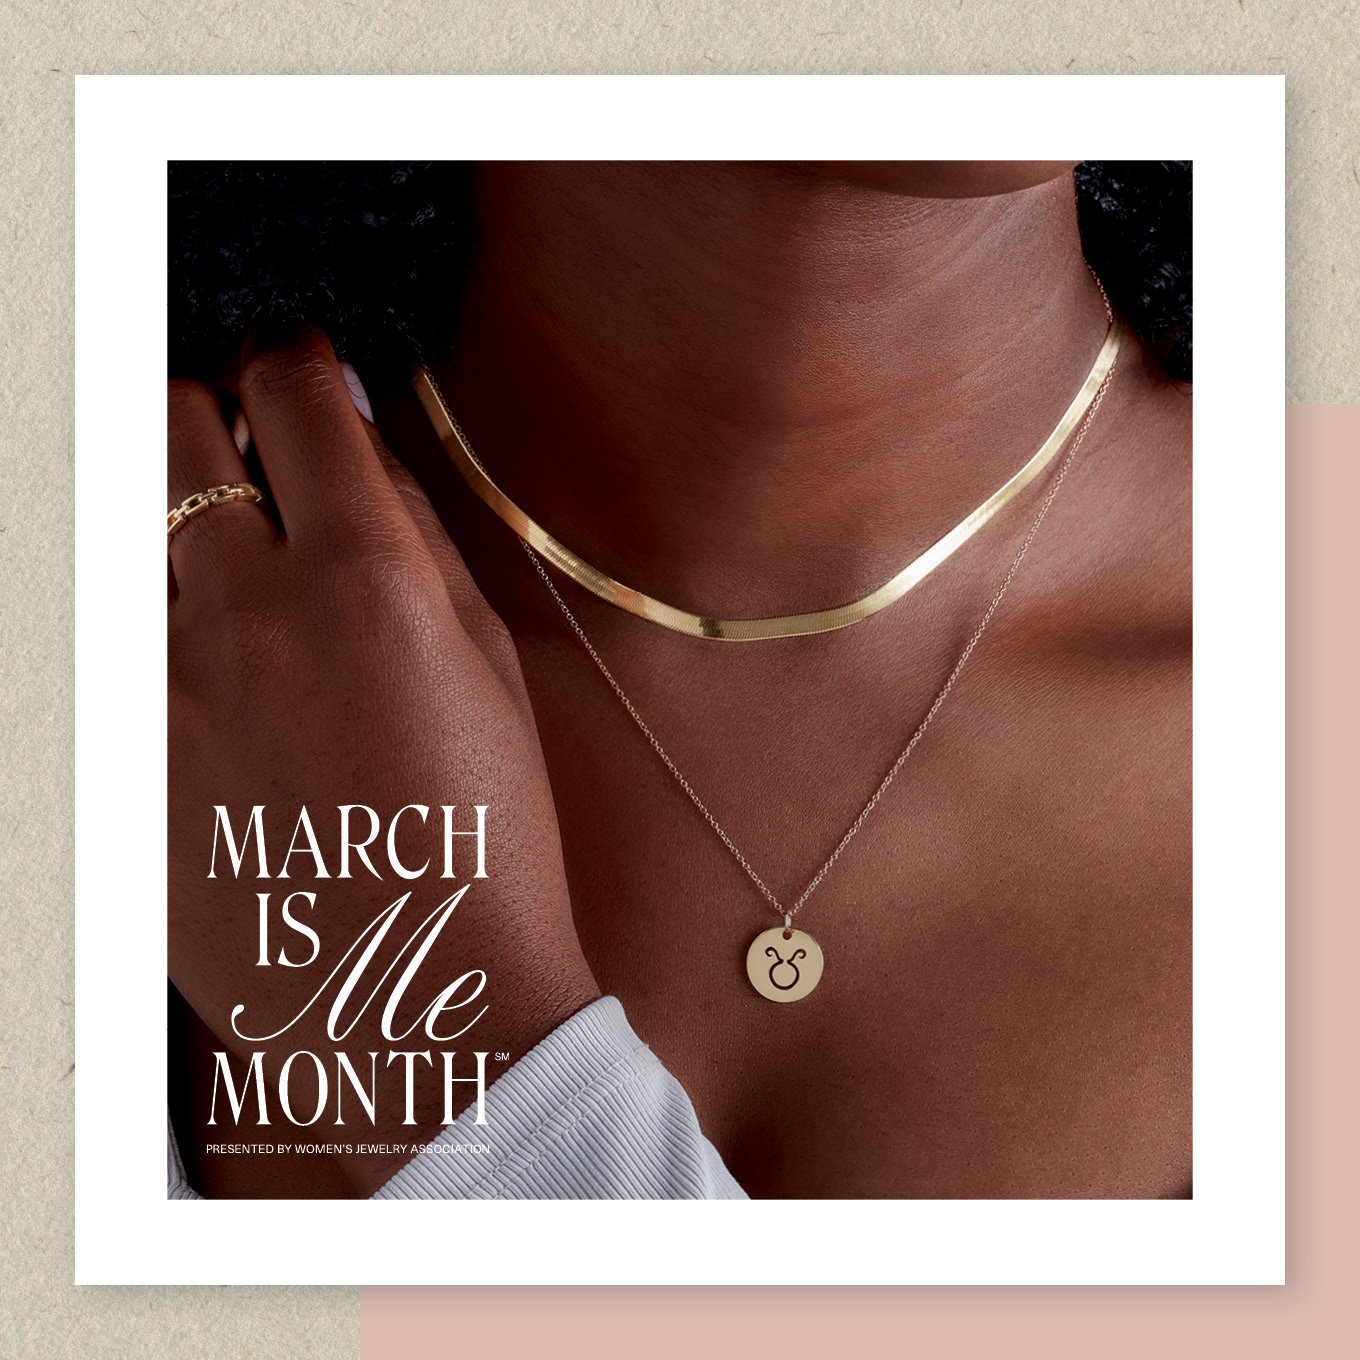 march is me month